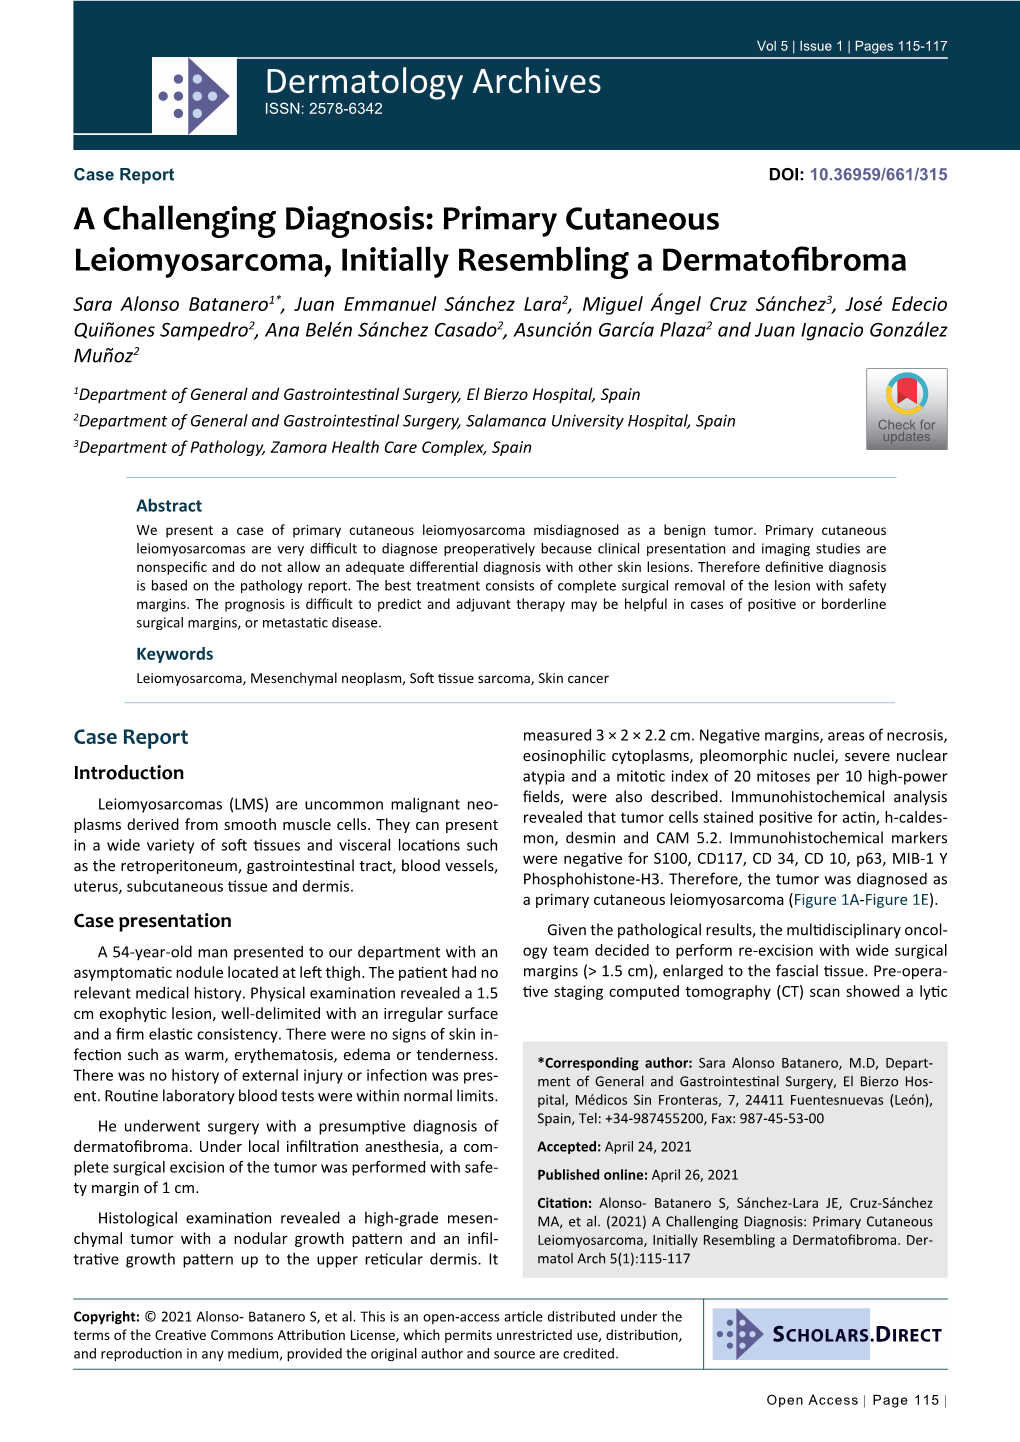 A Challenging Diagnosis: Primary Cutaneous Leiomyosarcoma